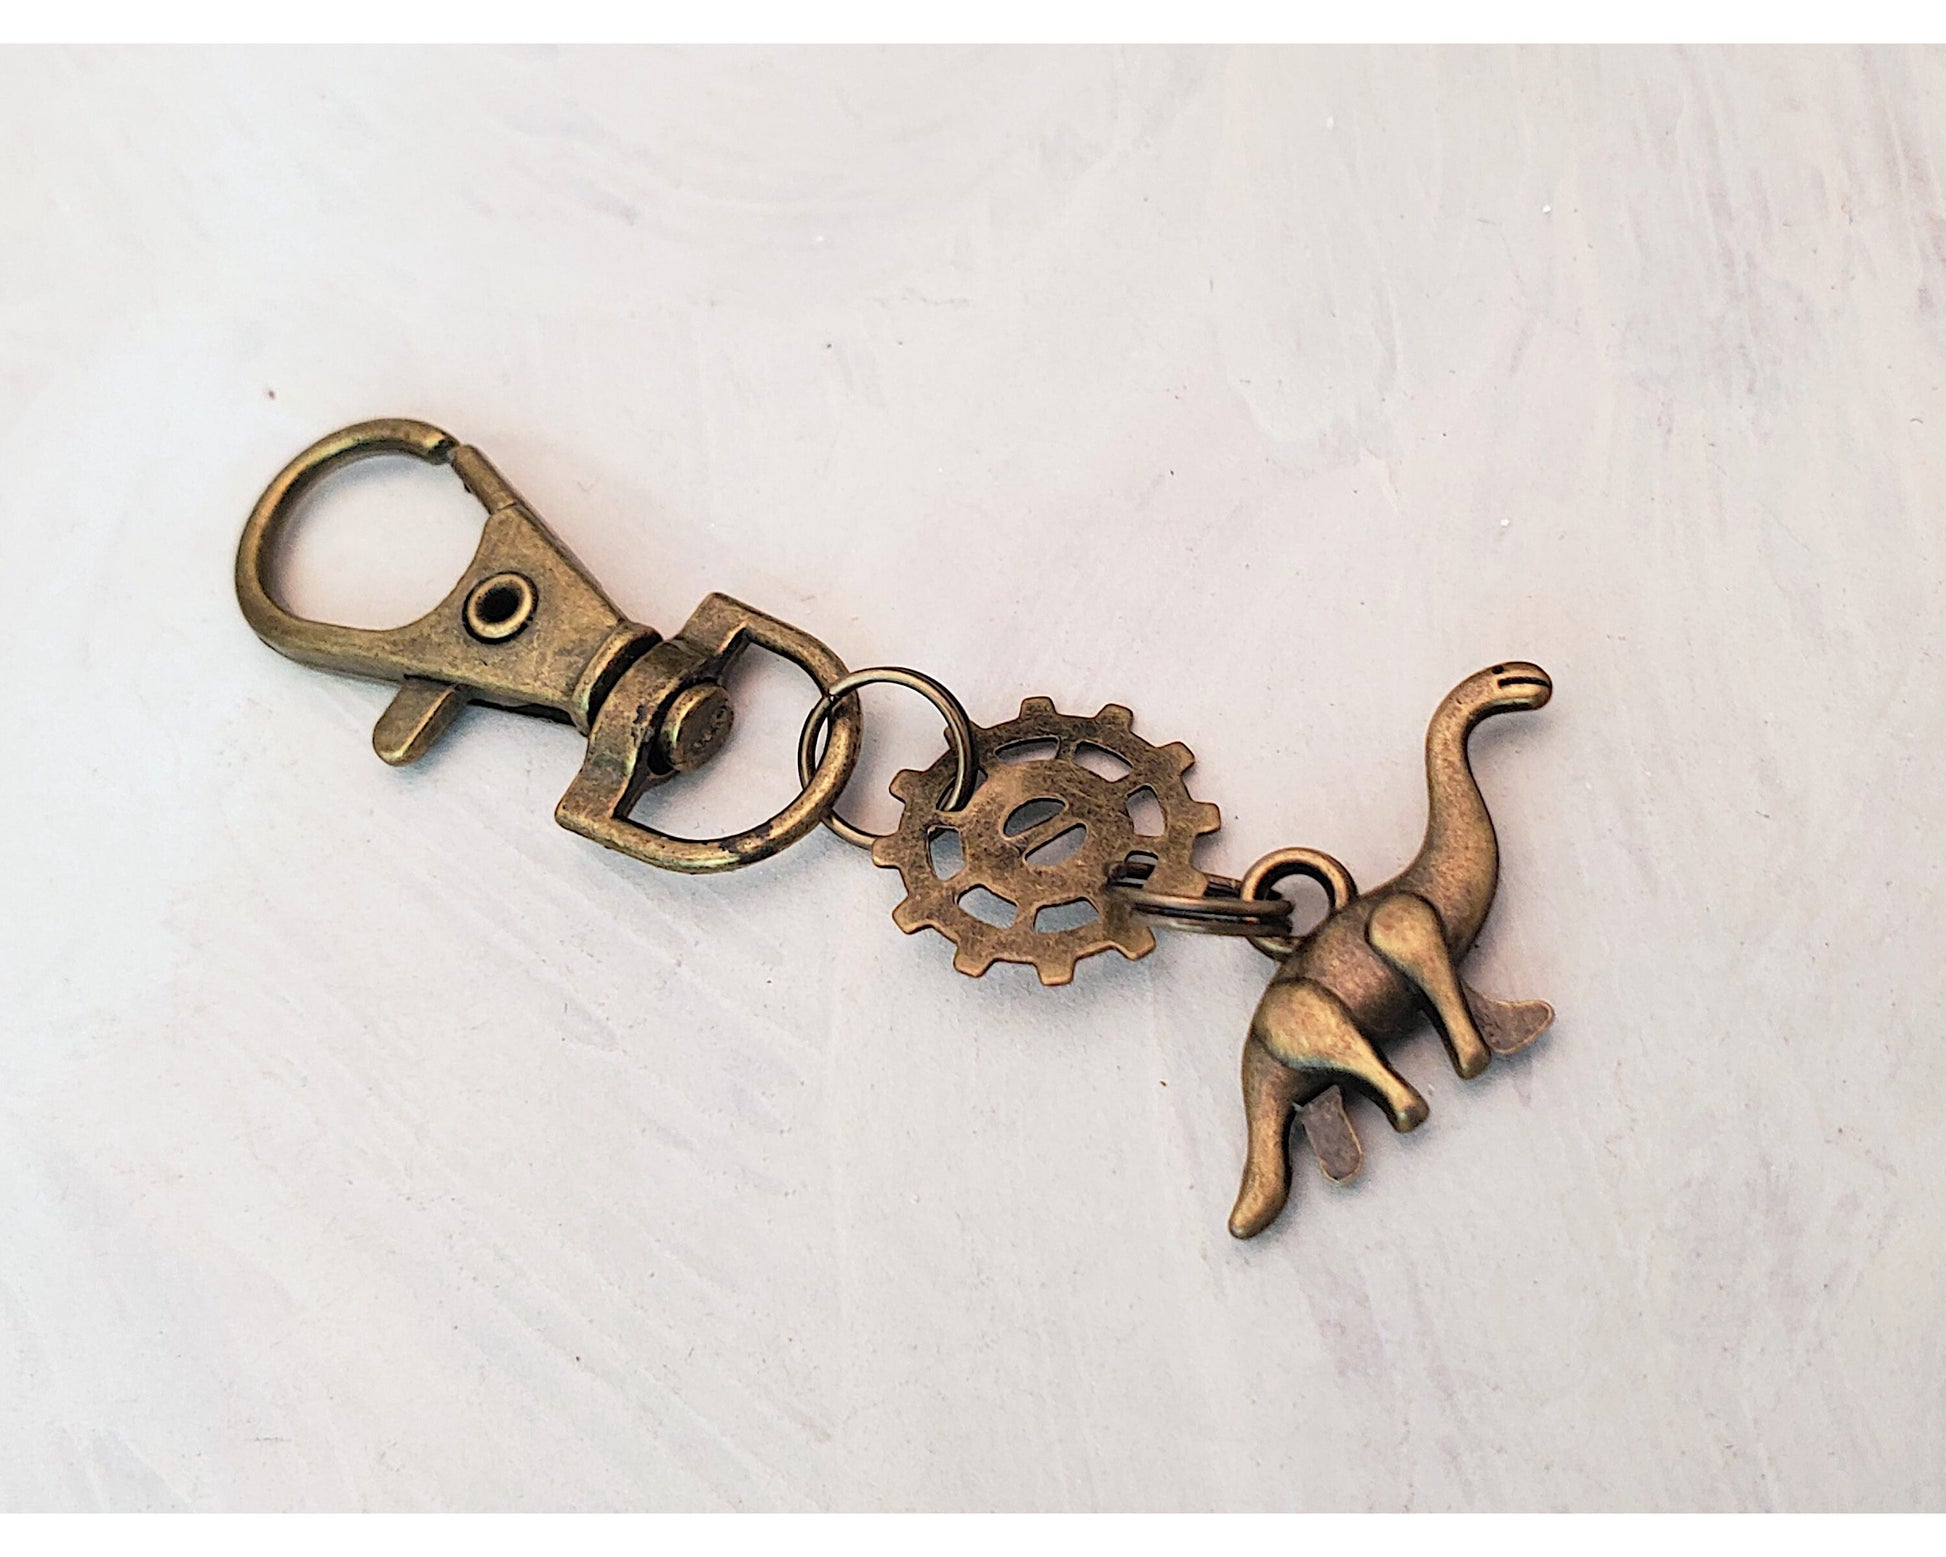 Steampunk Clip or Purse Charm with Fob in Antique Bronze, Gear, Dinosaur, Cellphone Charm